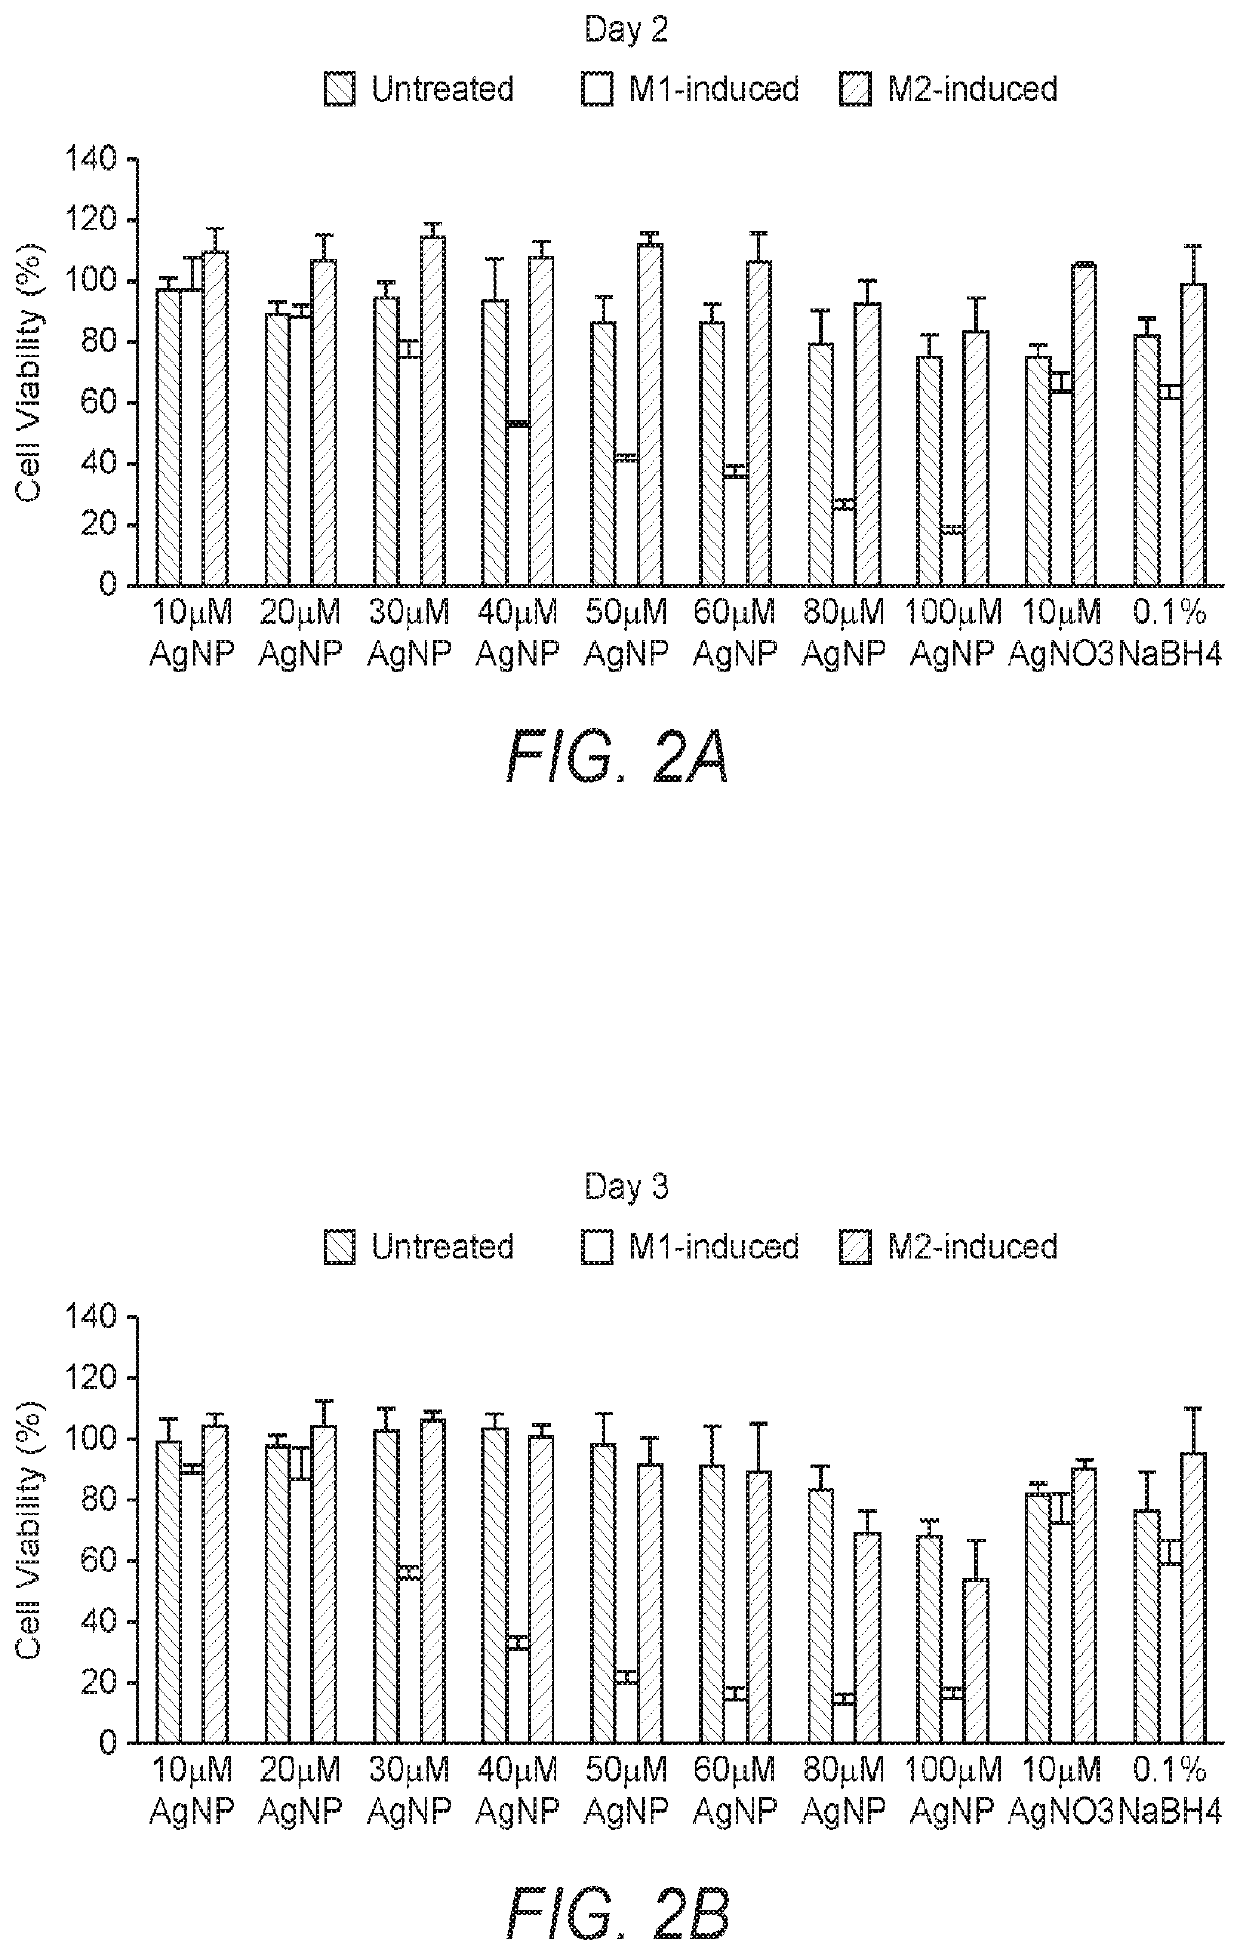 Compositions and methods for neuroprotection utilizing nanoparticulate silver